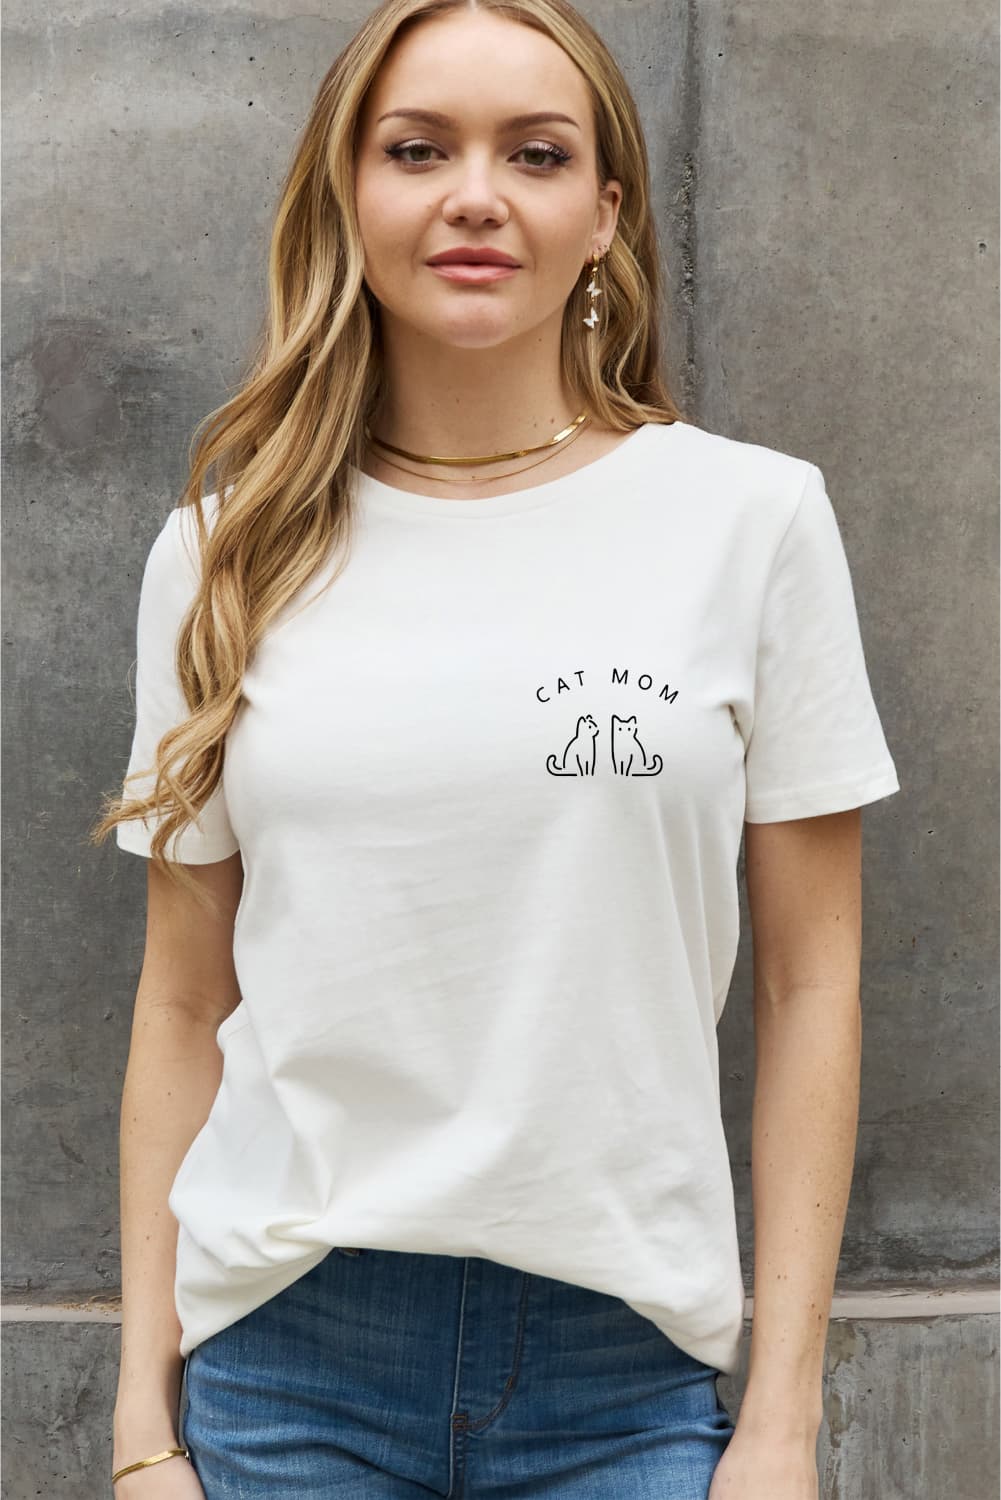 Simply Love Full Size CAT MOM Graphic Cotton Tee